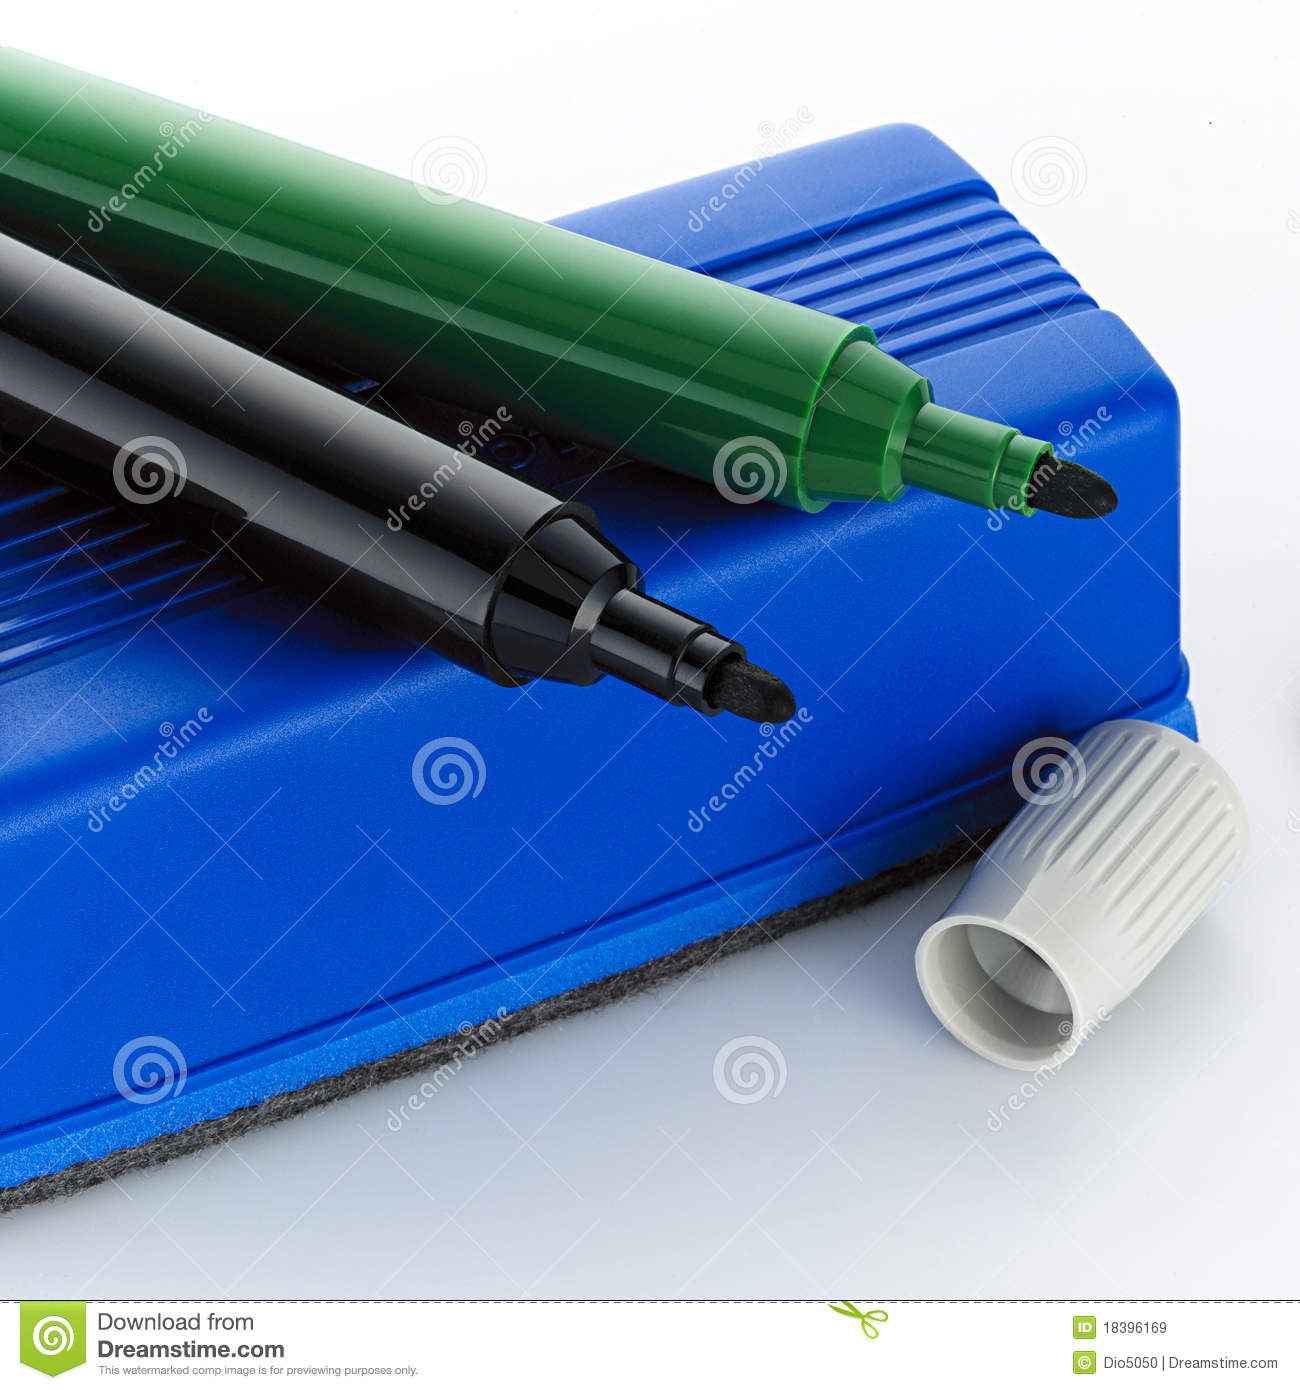 Whiteboard Pens And Eraser Royalty Free Stock Images   Image  18396169